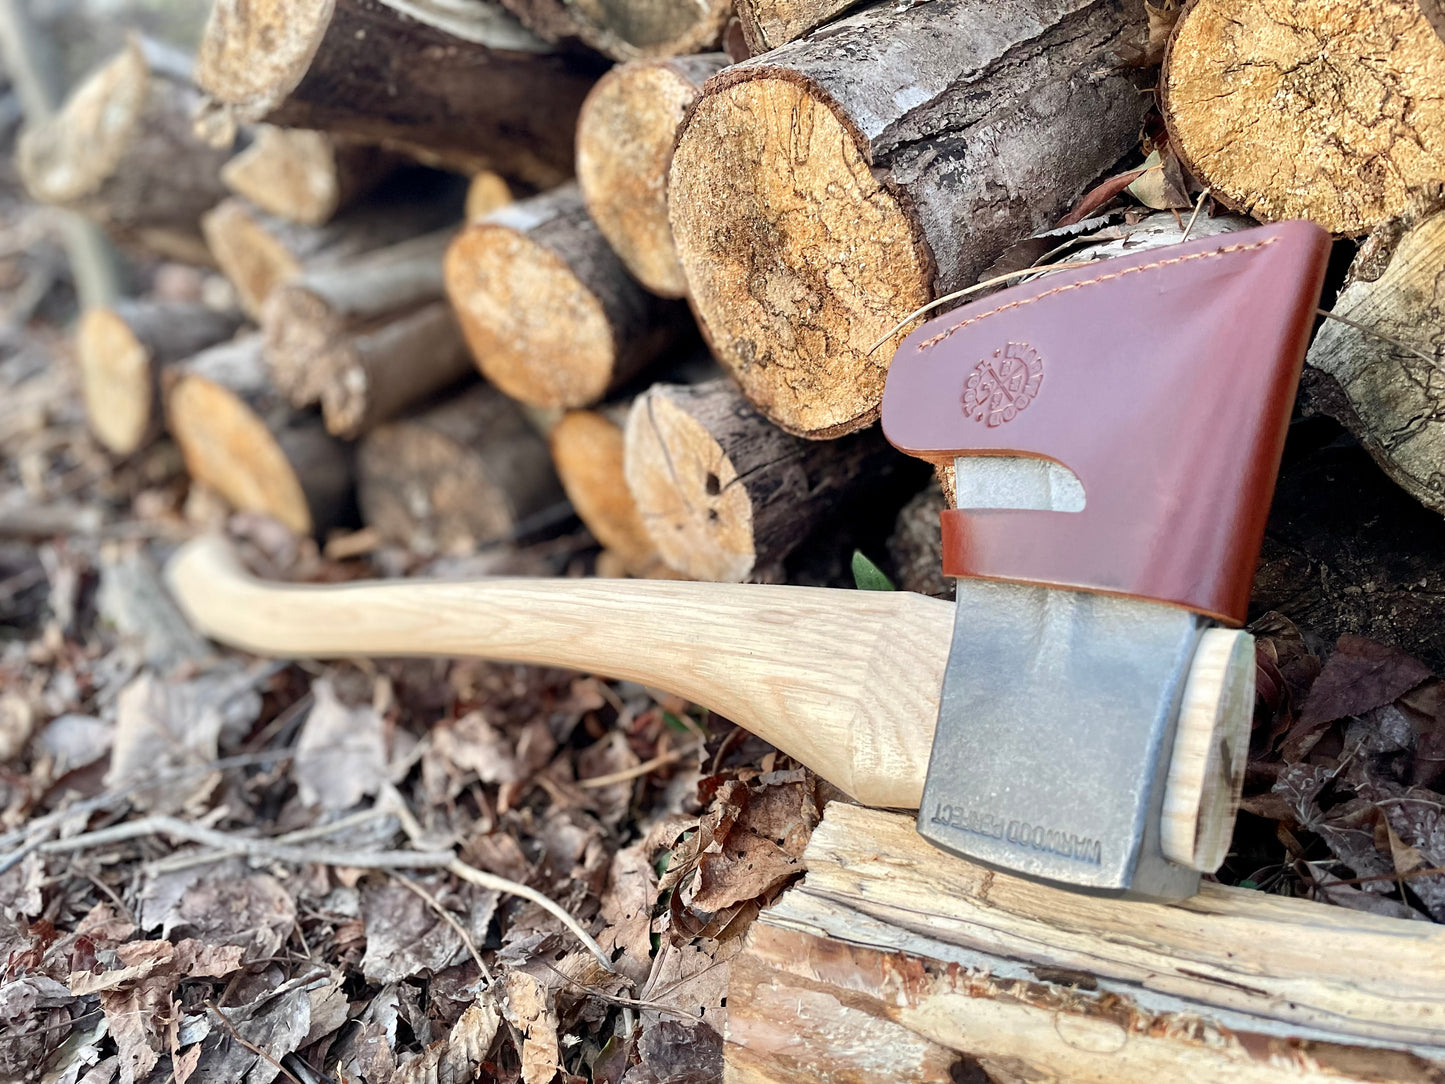 Warwood Tool's Perfect Axe with sheath on, laid next to a log pile.